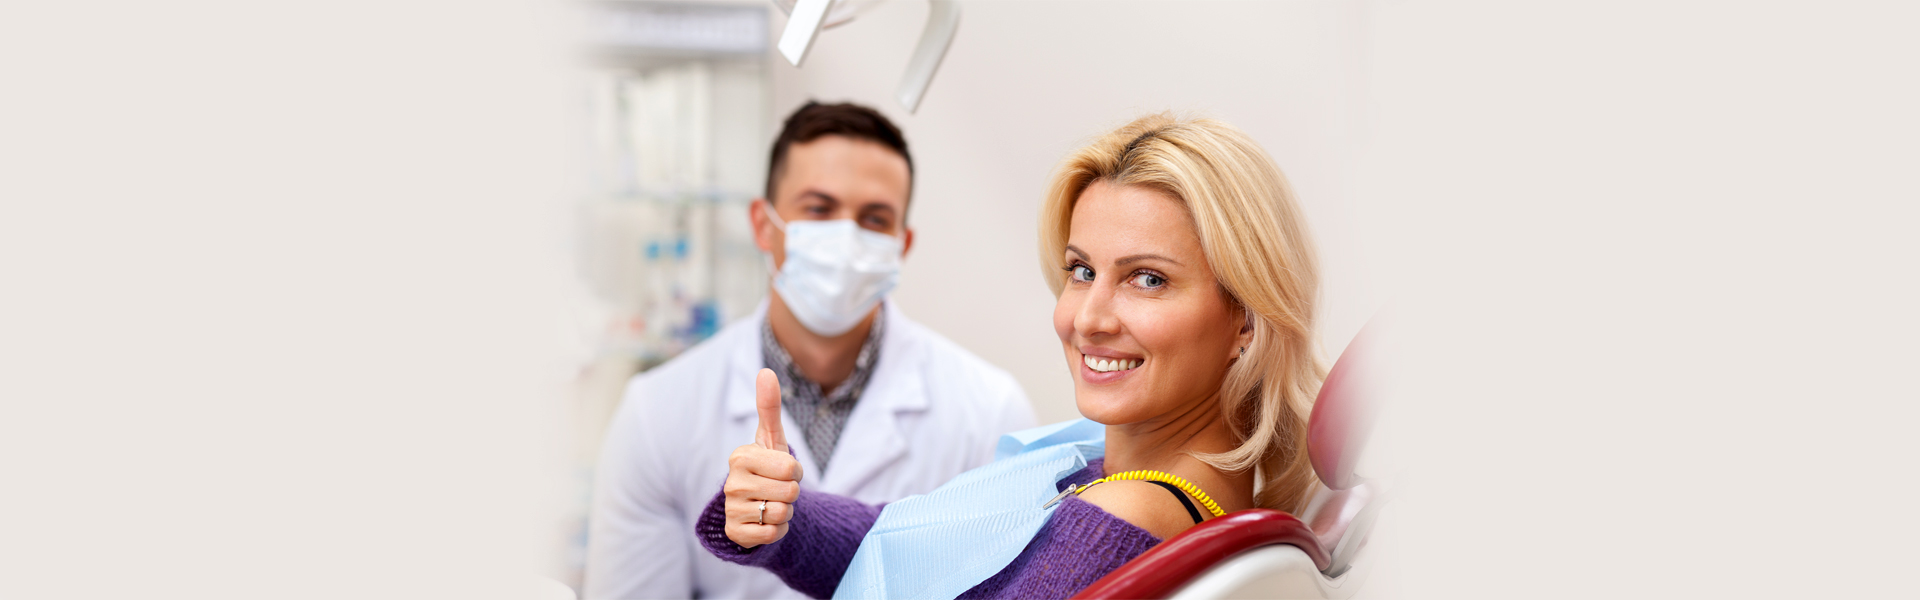 Your Dental Implant Procedure: What to Expect